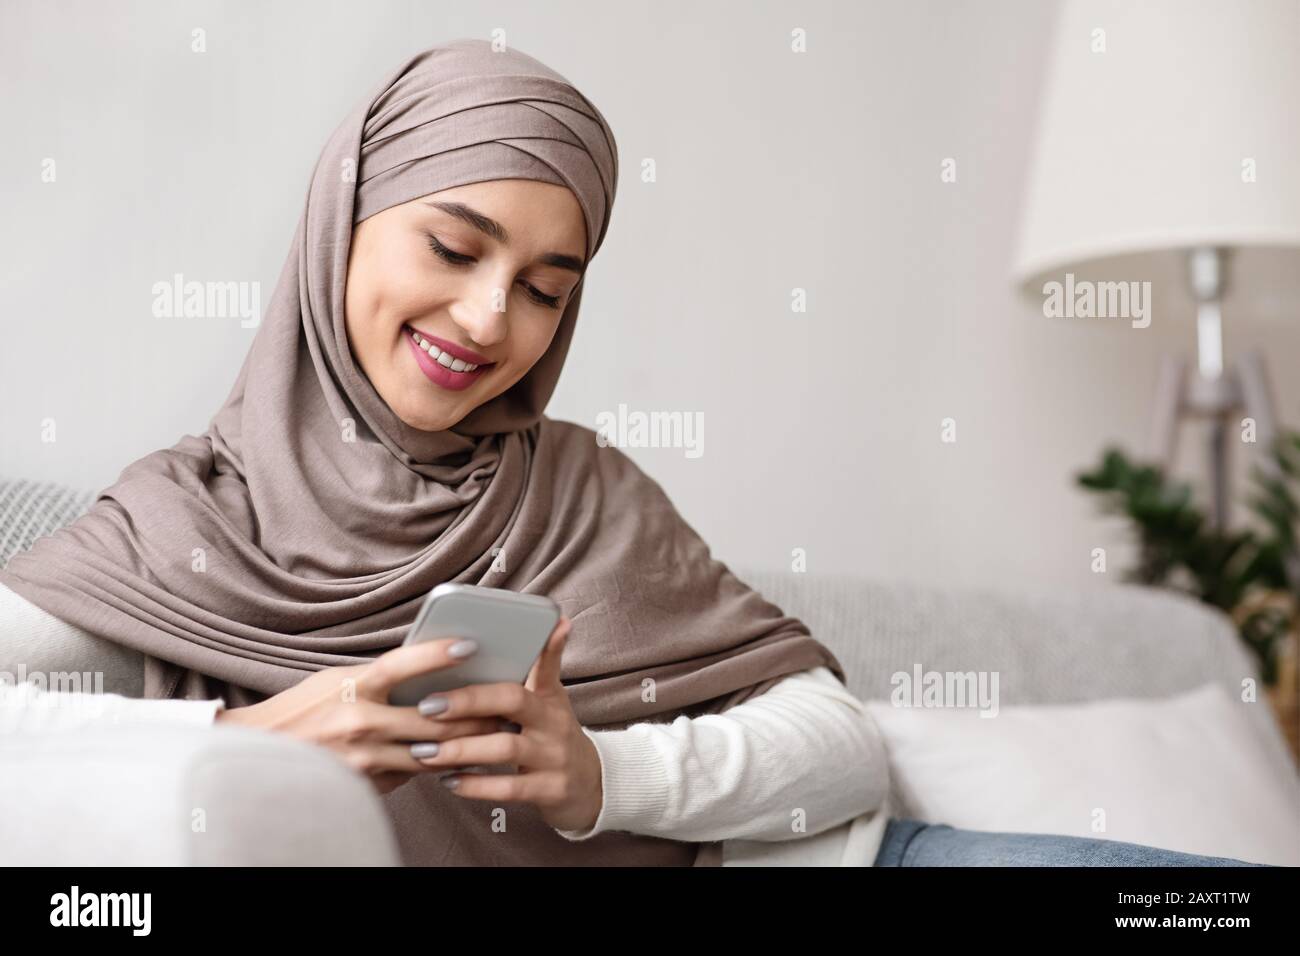 Cheerful arabic girl in hijab spending time with smartphone at home Stock Photo